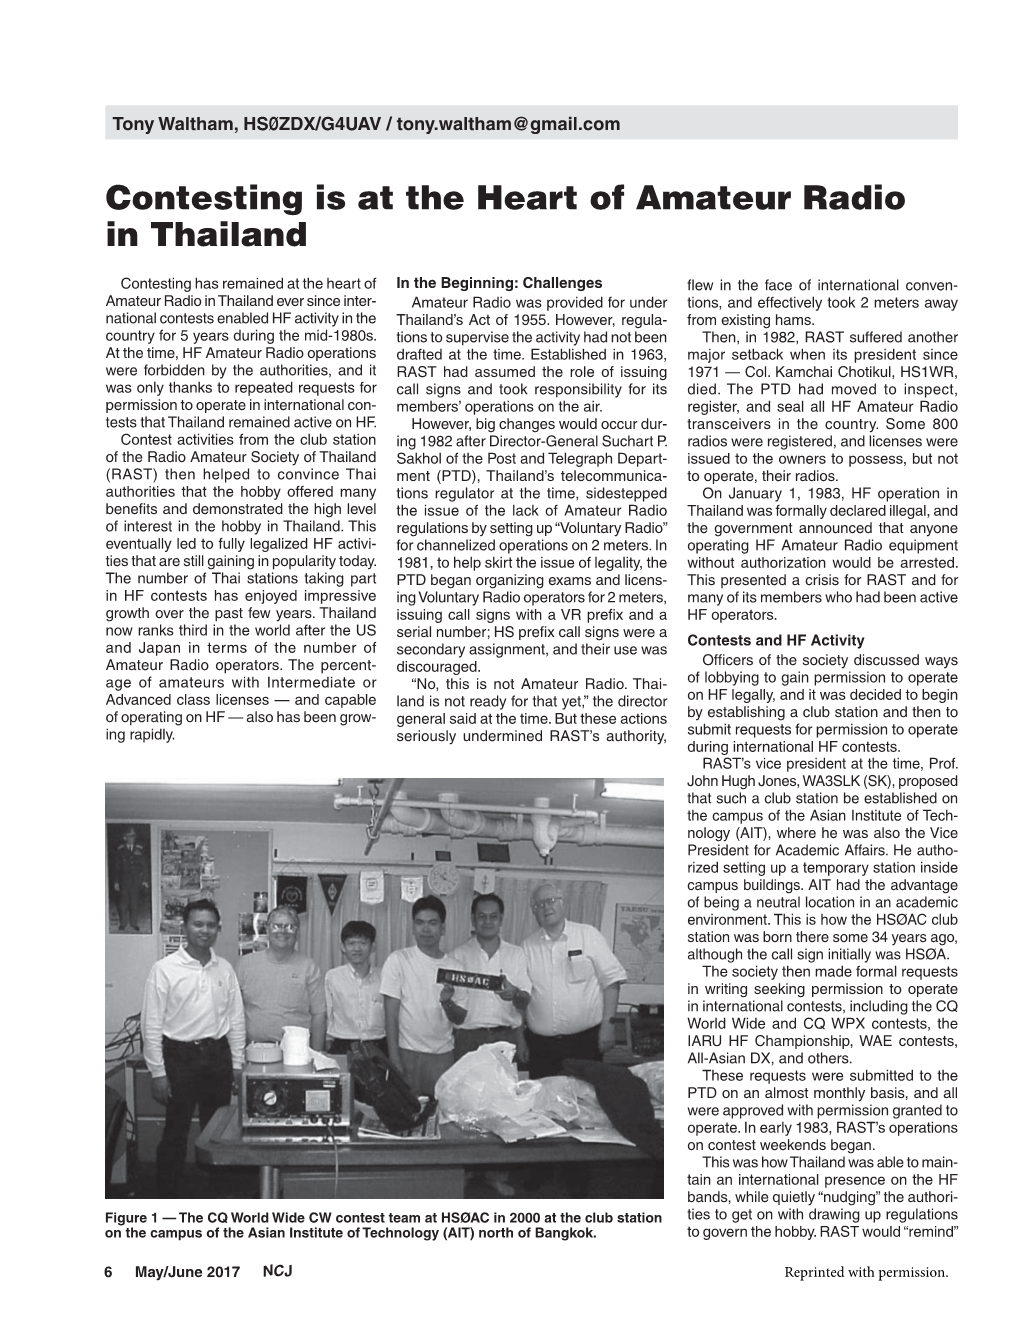 Contesting Is at the Heart of Amateur Radio in Thailand